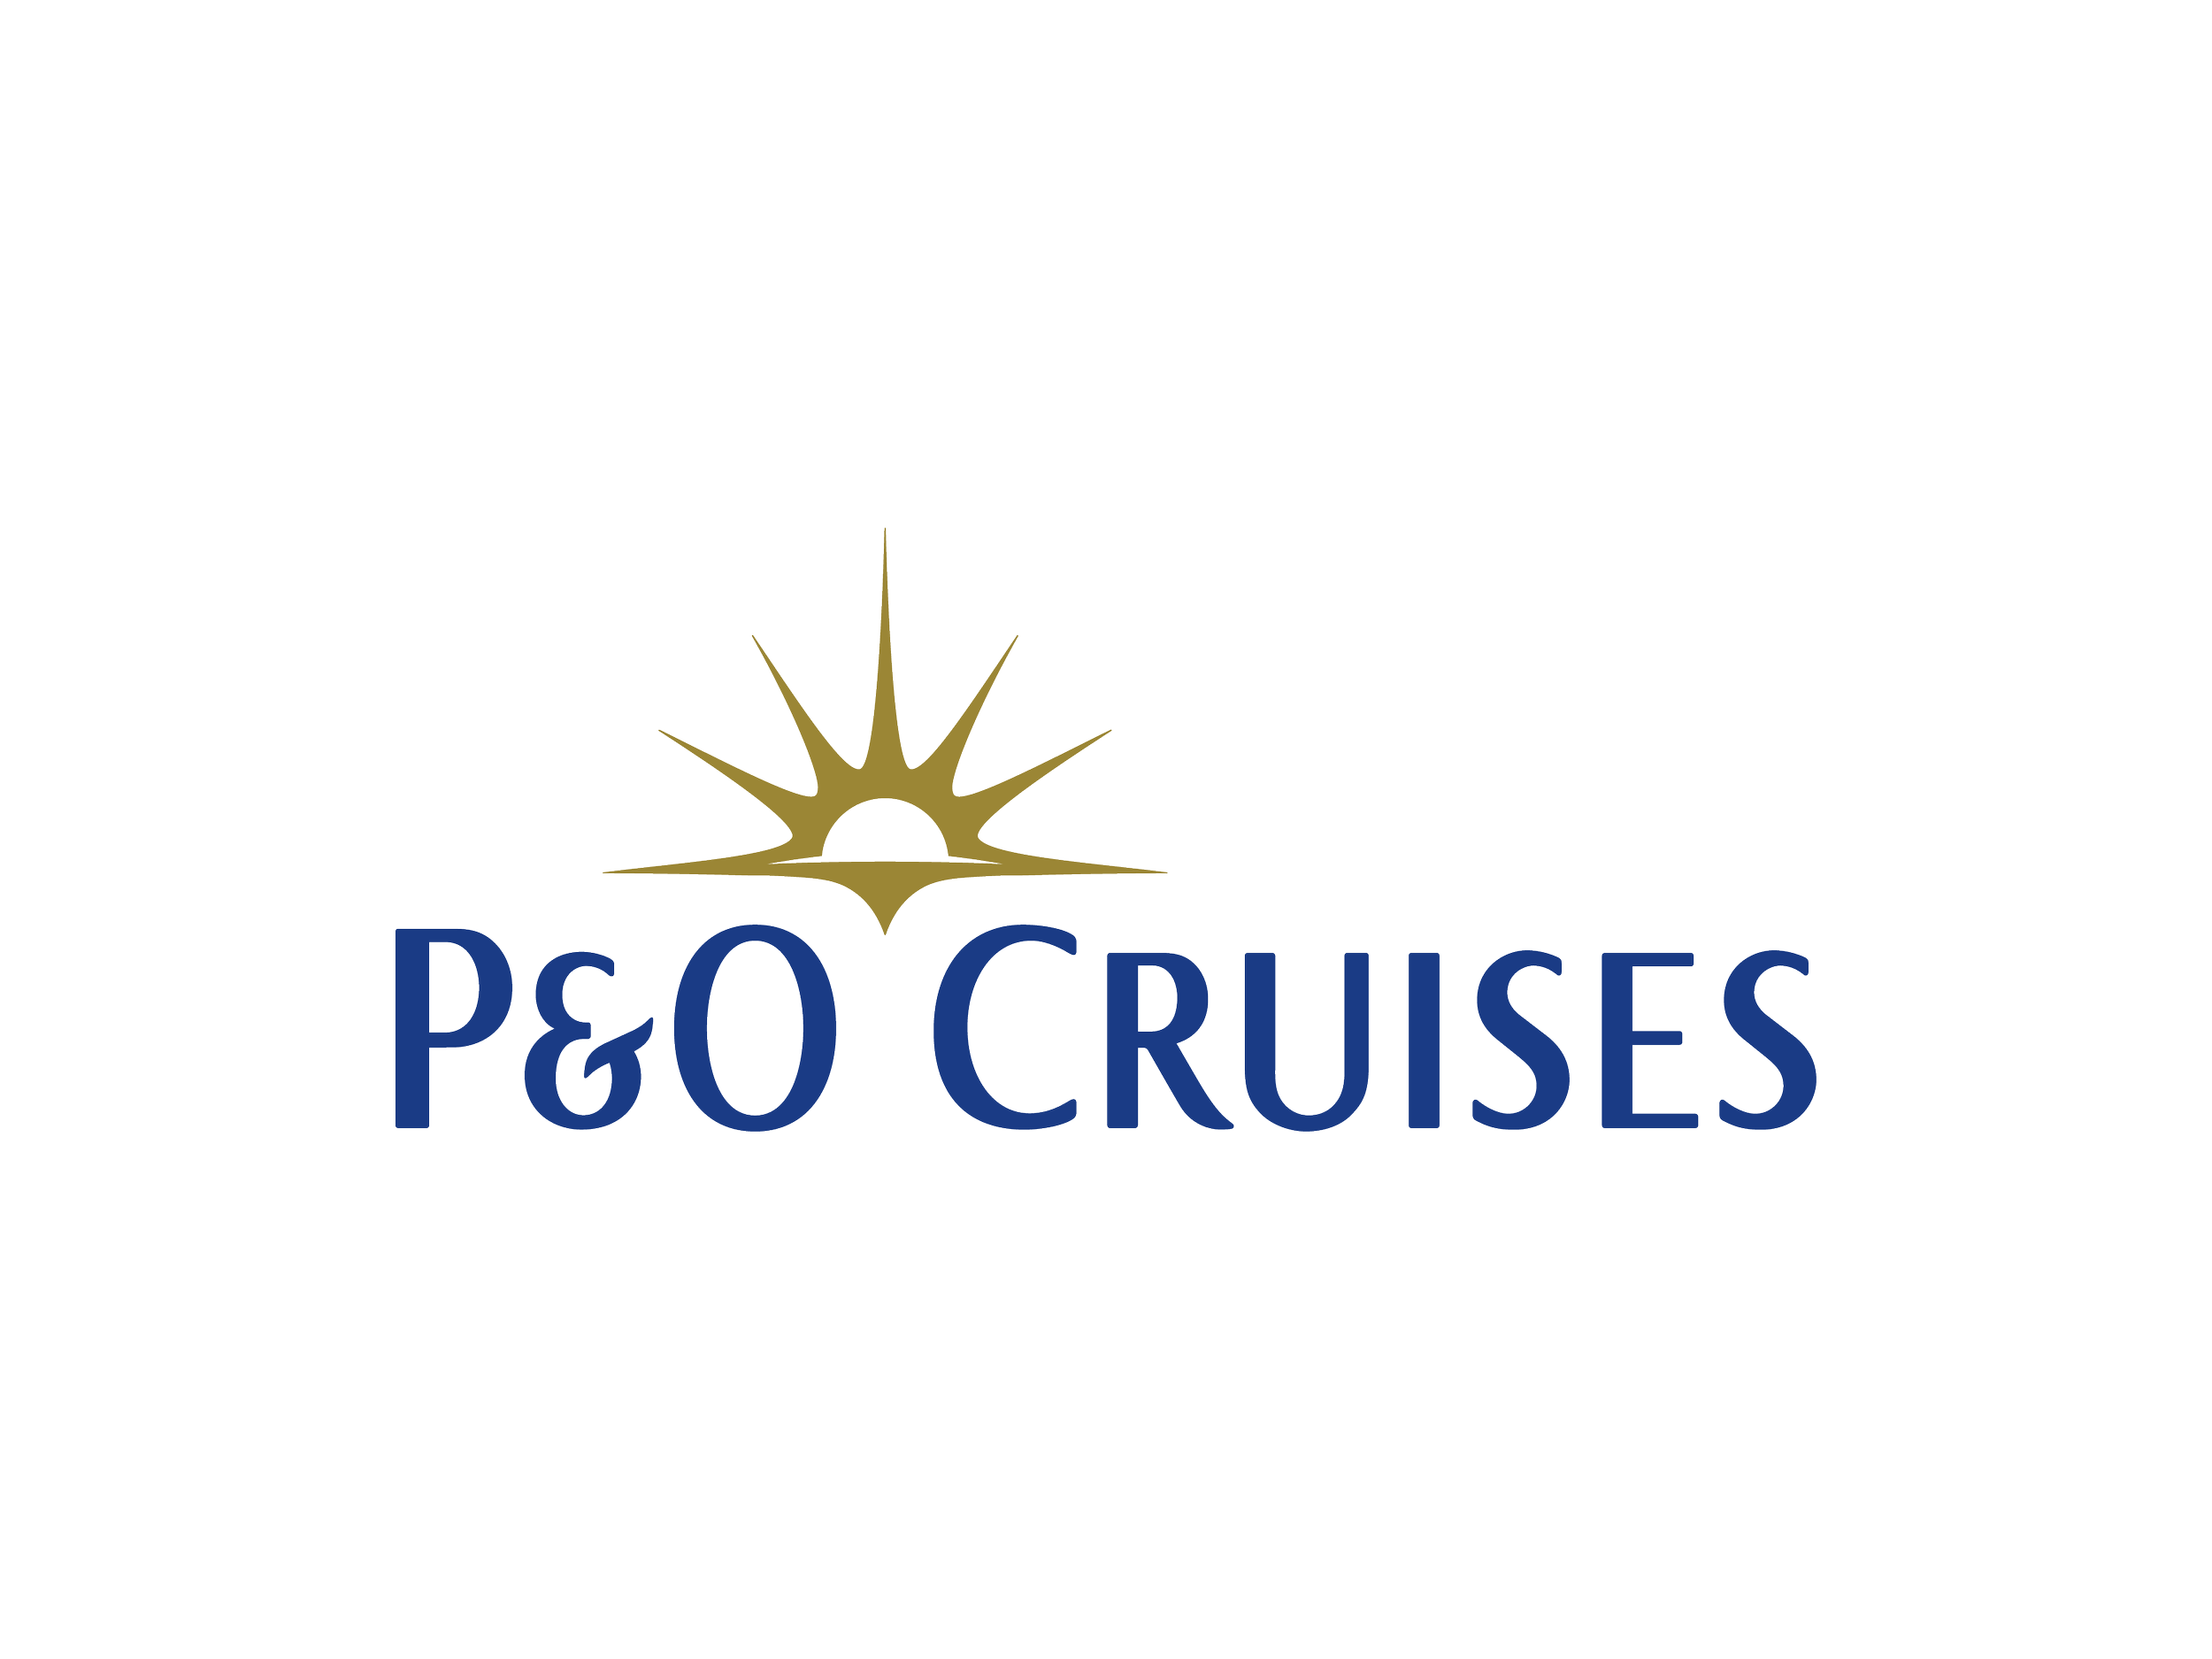 PURE_ClientLogo_P&OCruises.png